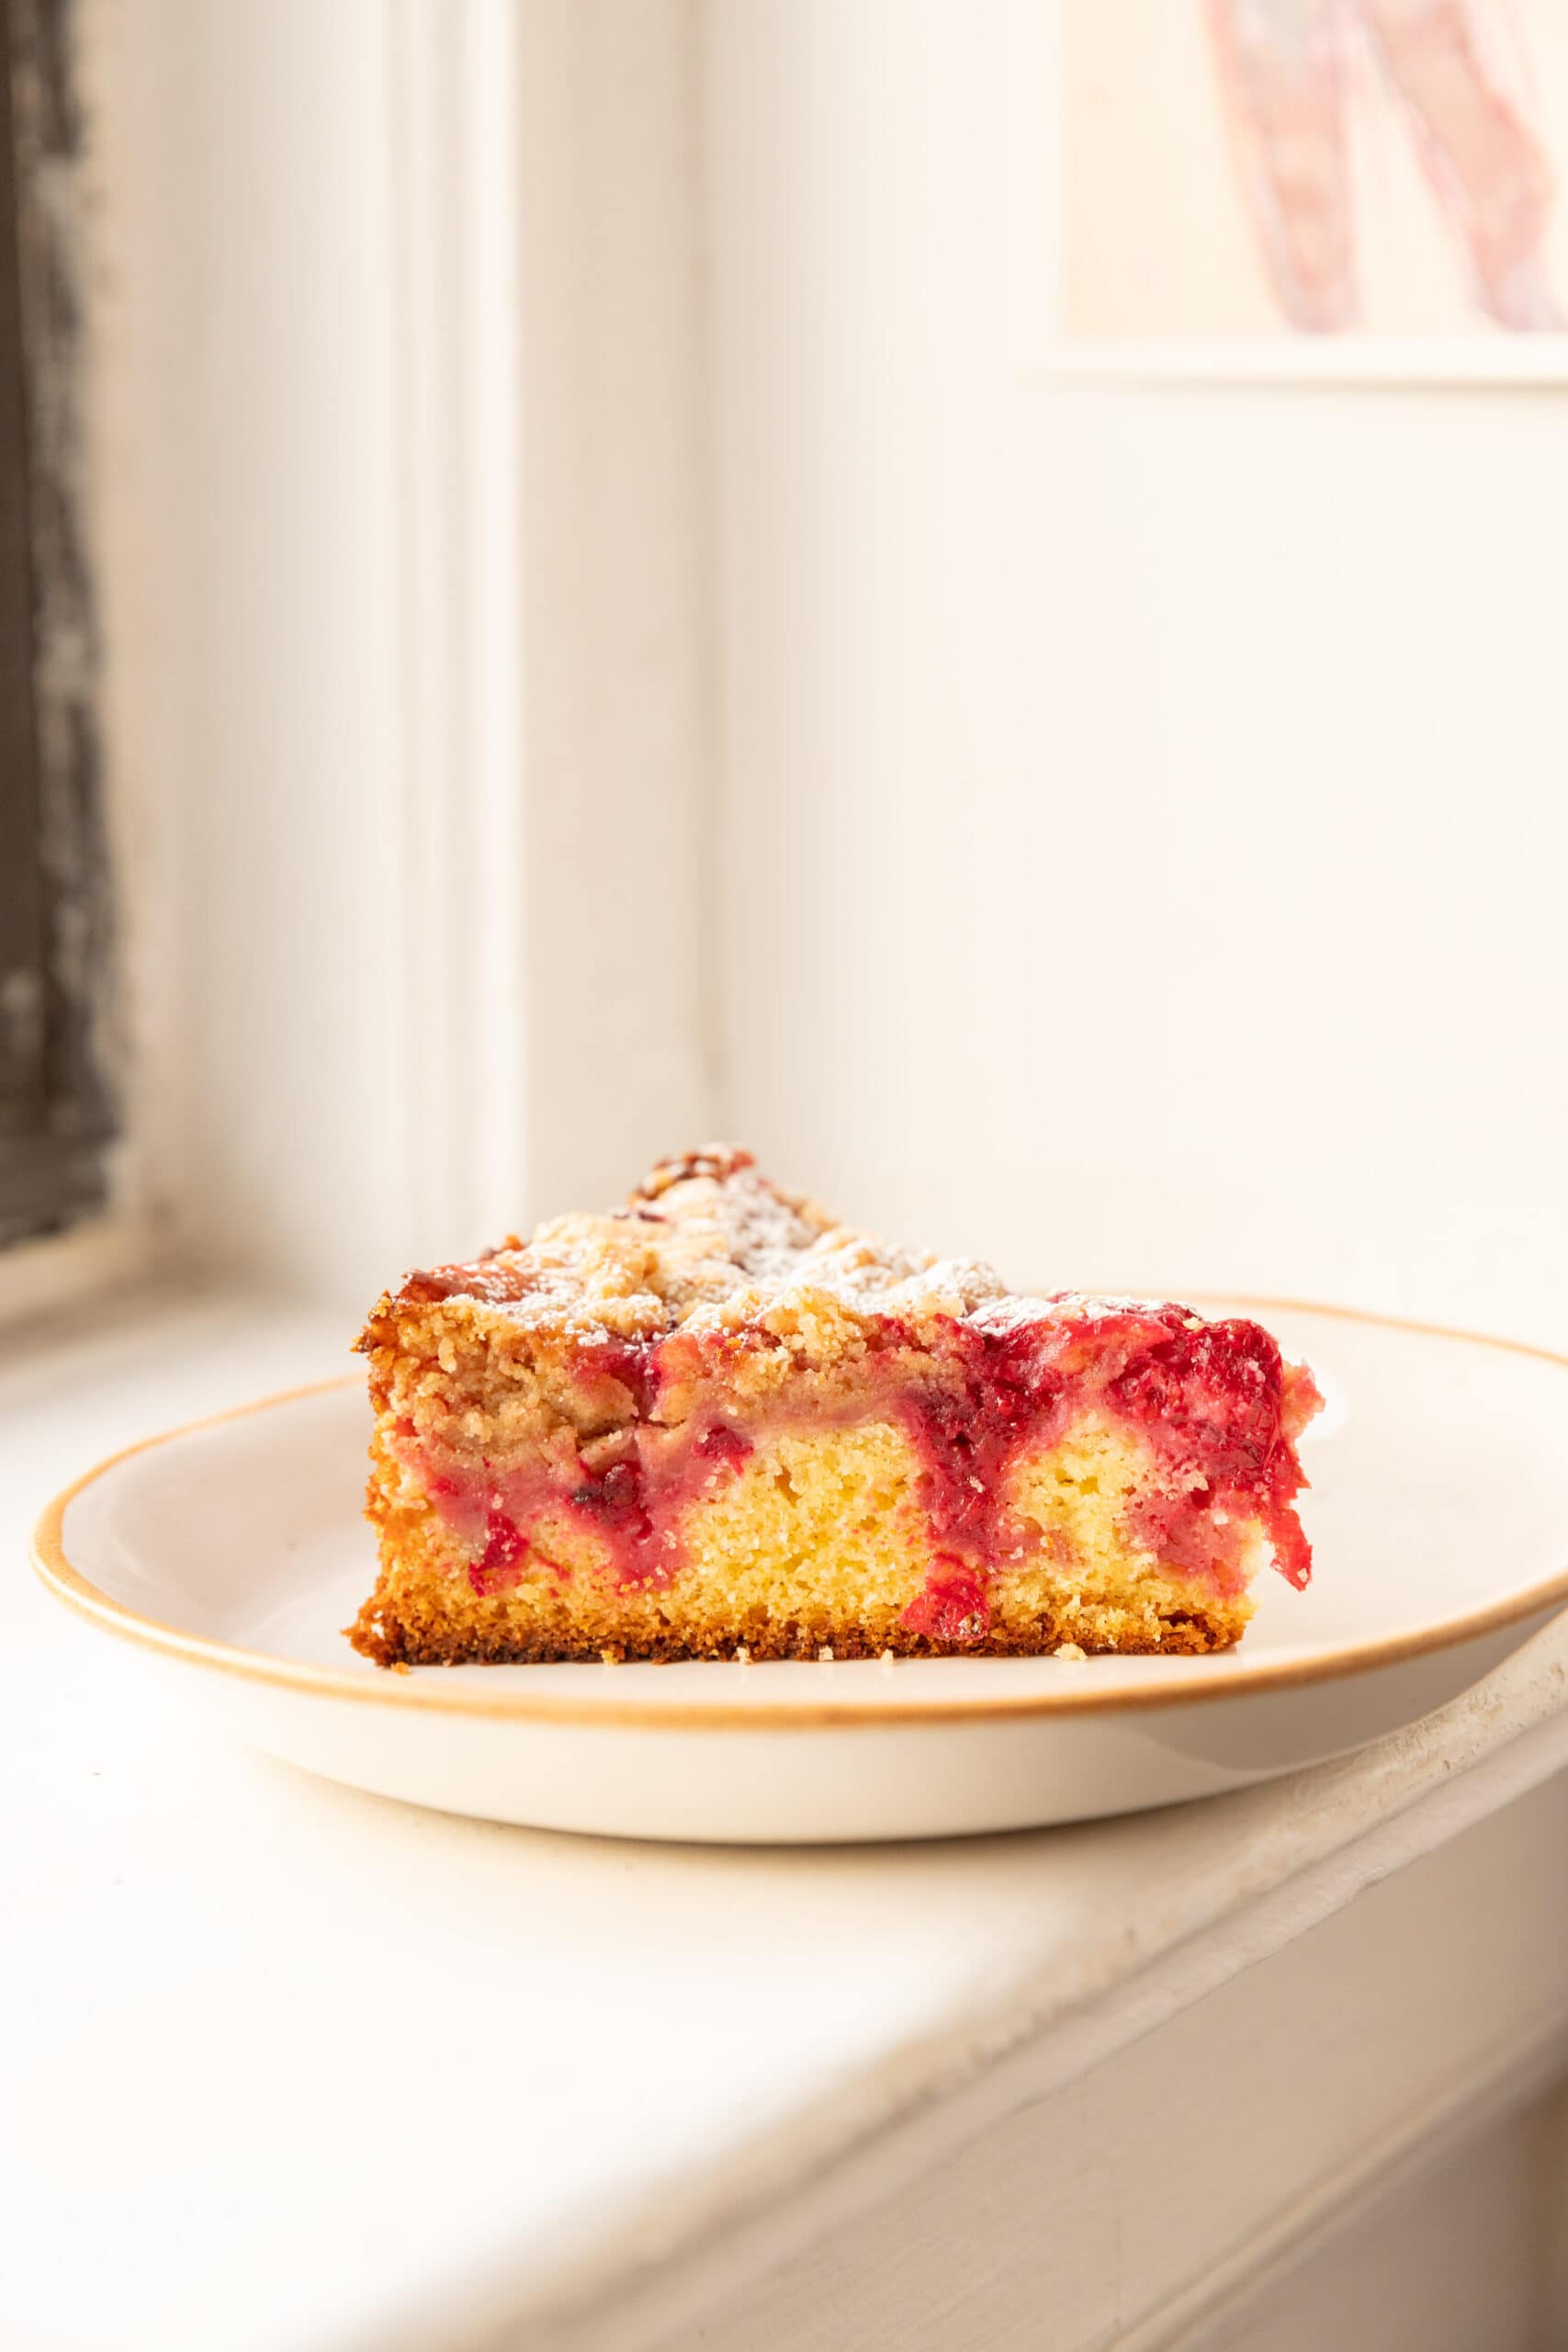 Side view of a slice or red currant cake on a white ceramic plate.